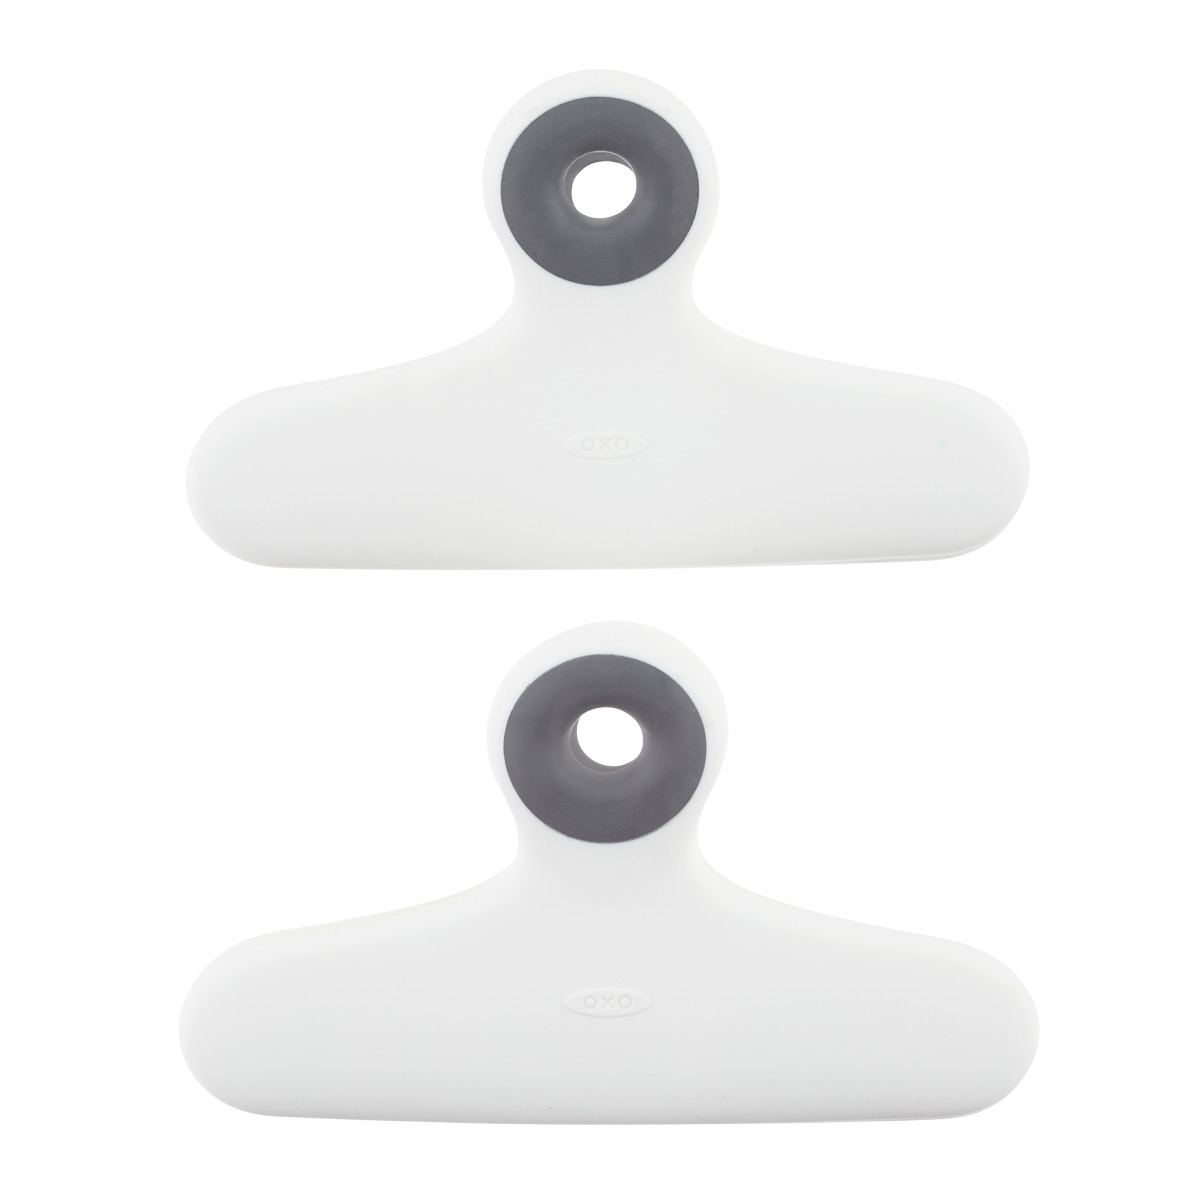  OXO Good Grips Bag/Plastic Chip Clips - 2 Pack, White : Office  Products